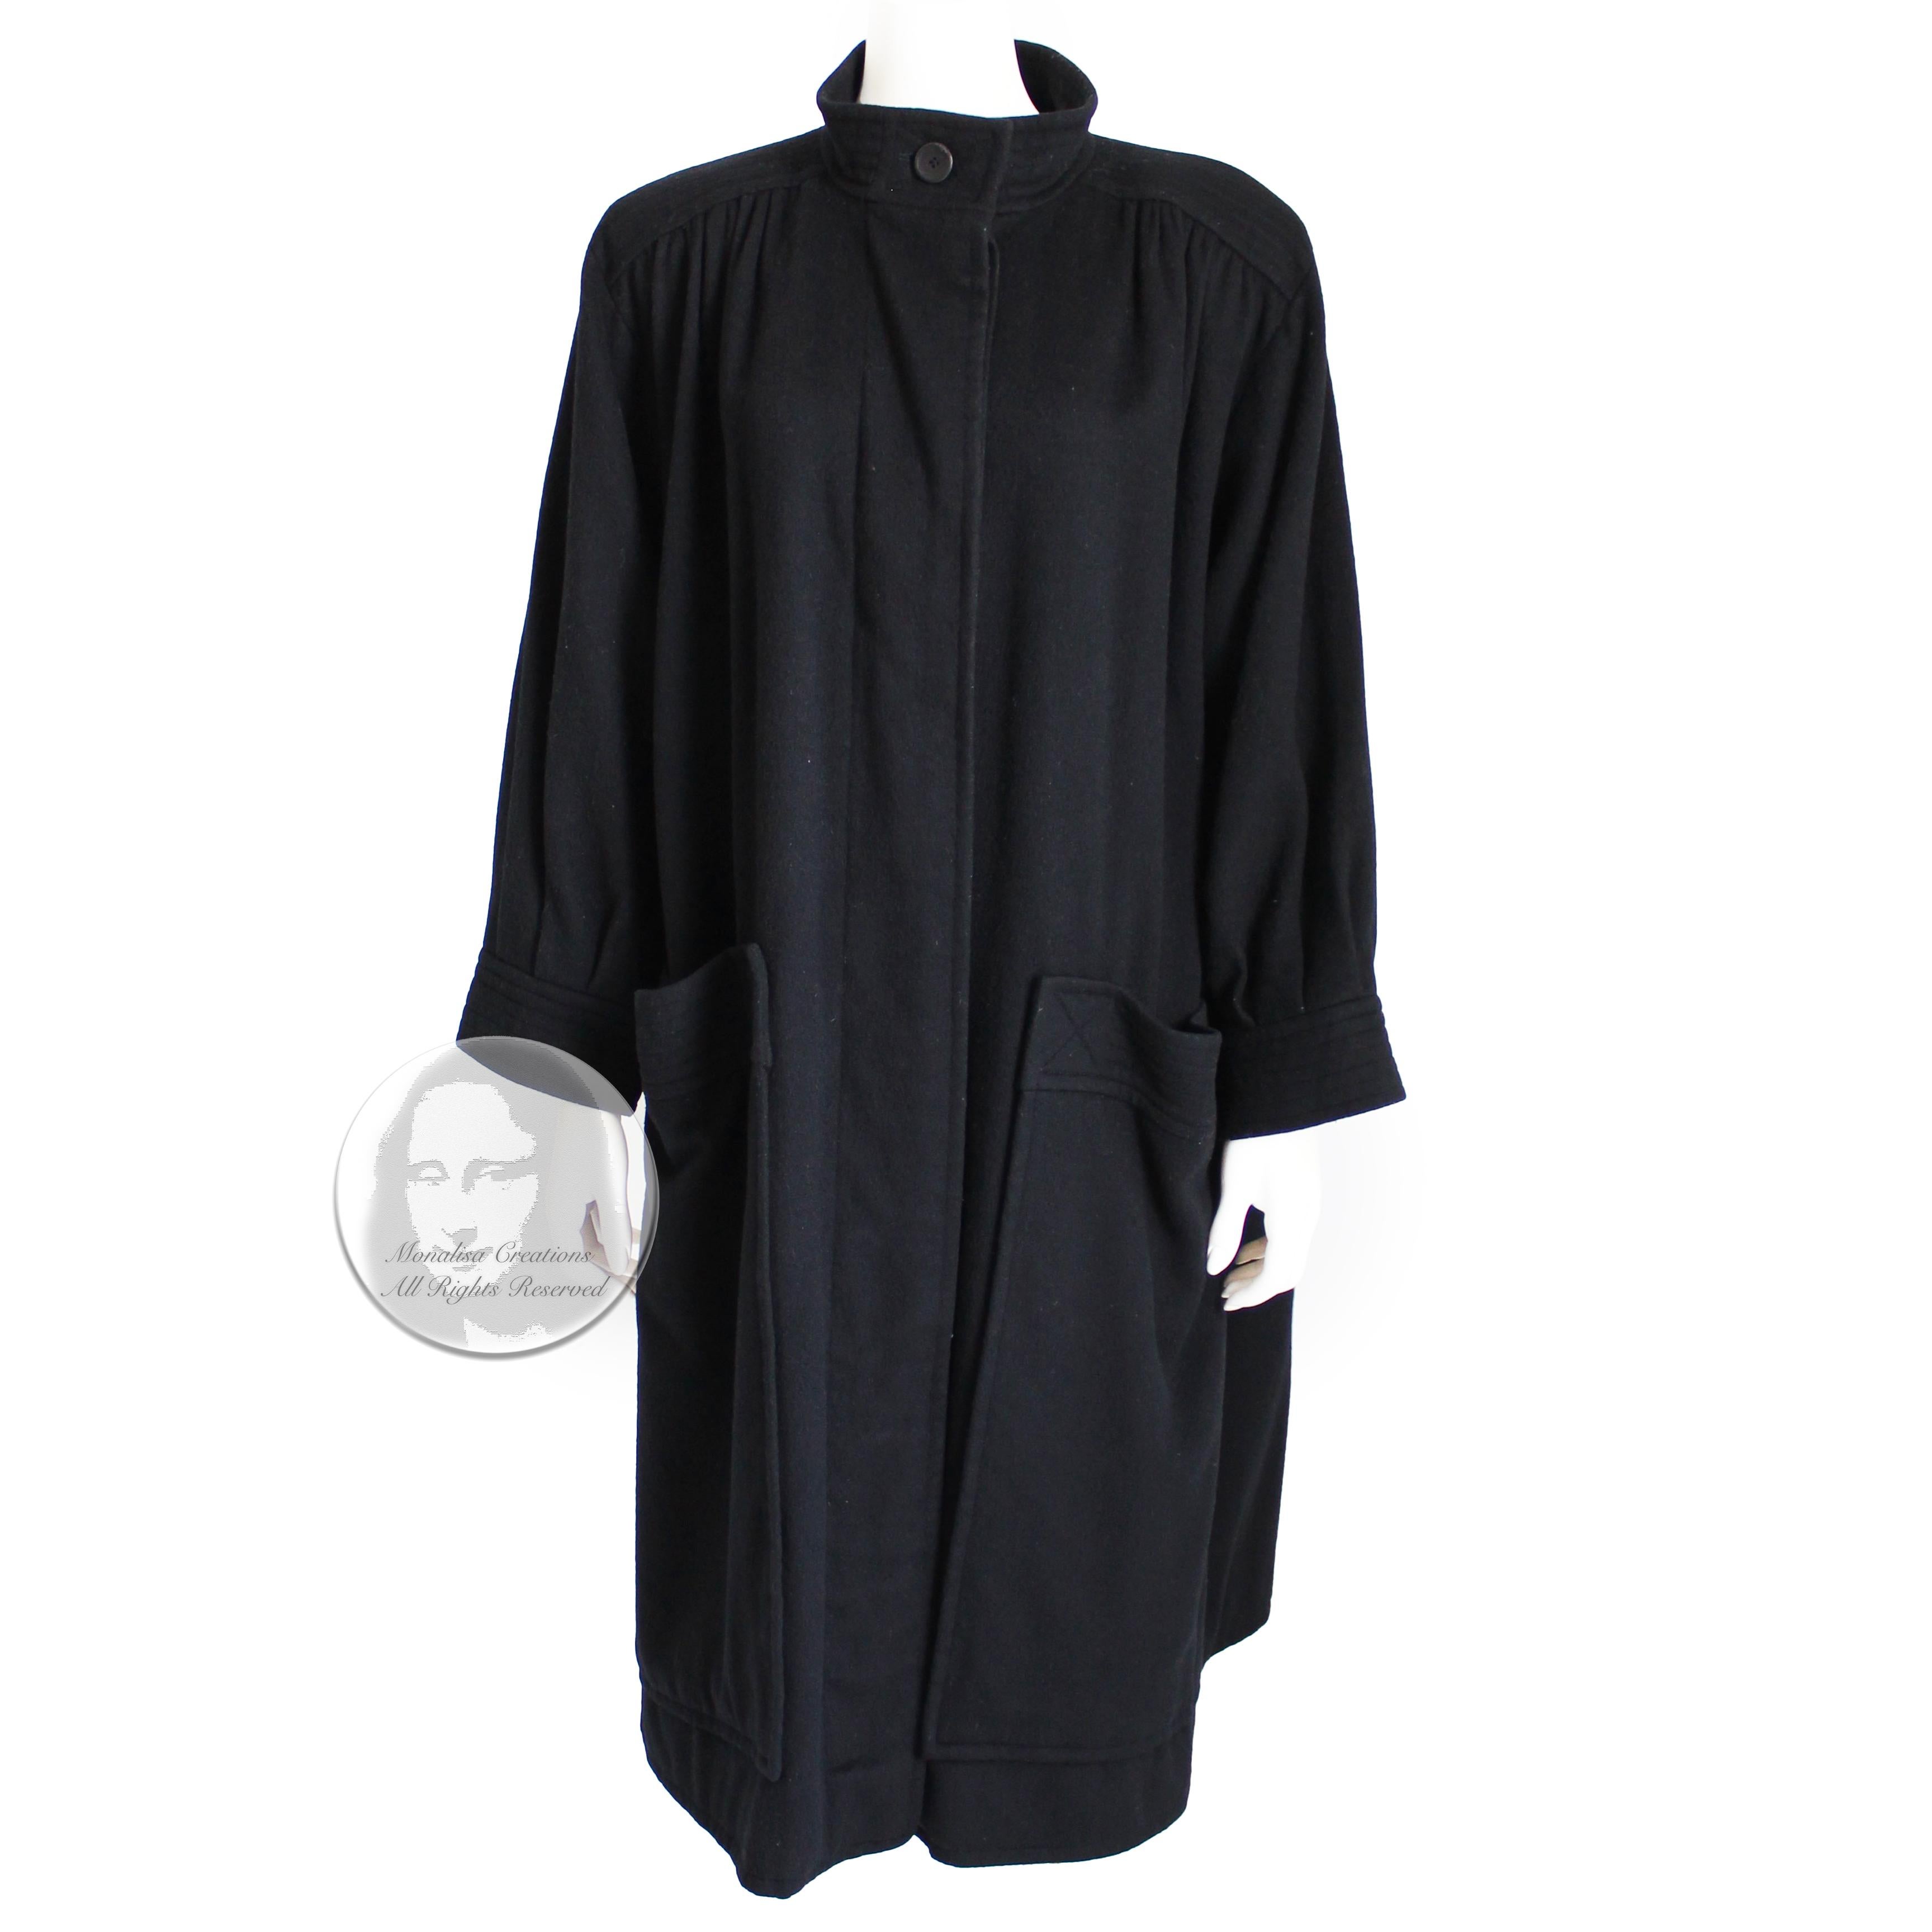 Authentic, preowned, vintage Yves Saint Laurent Rive Gauche long black wool coat, likely made in the late 70.. 

Made from a supple black wool, it features shoulder pads under the lining and an oversized pocket at each hip.  It fastens with five